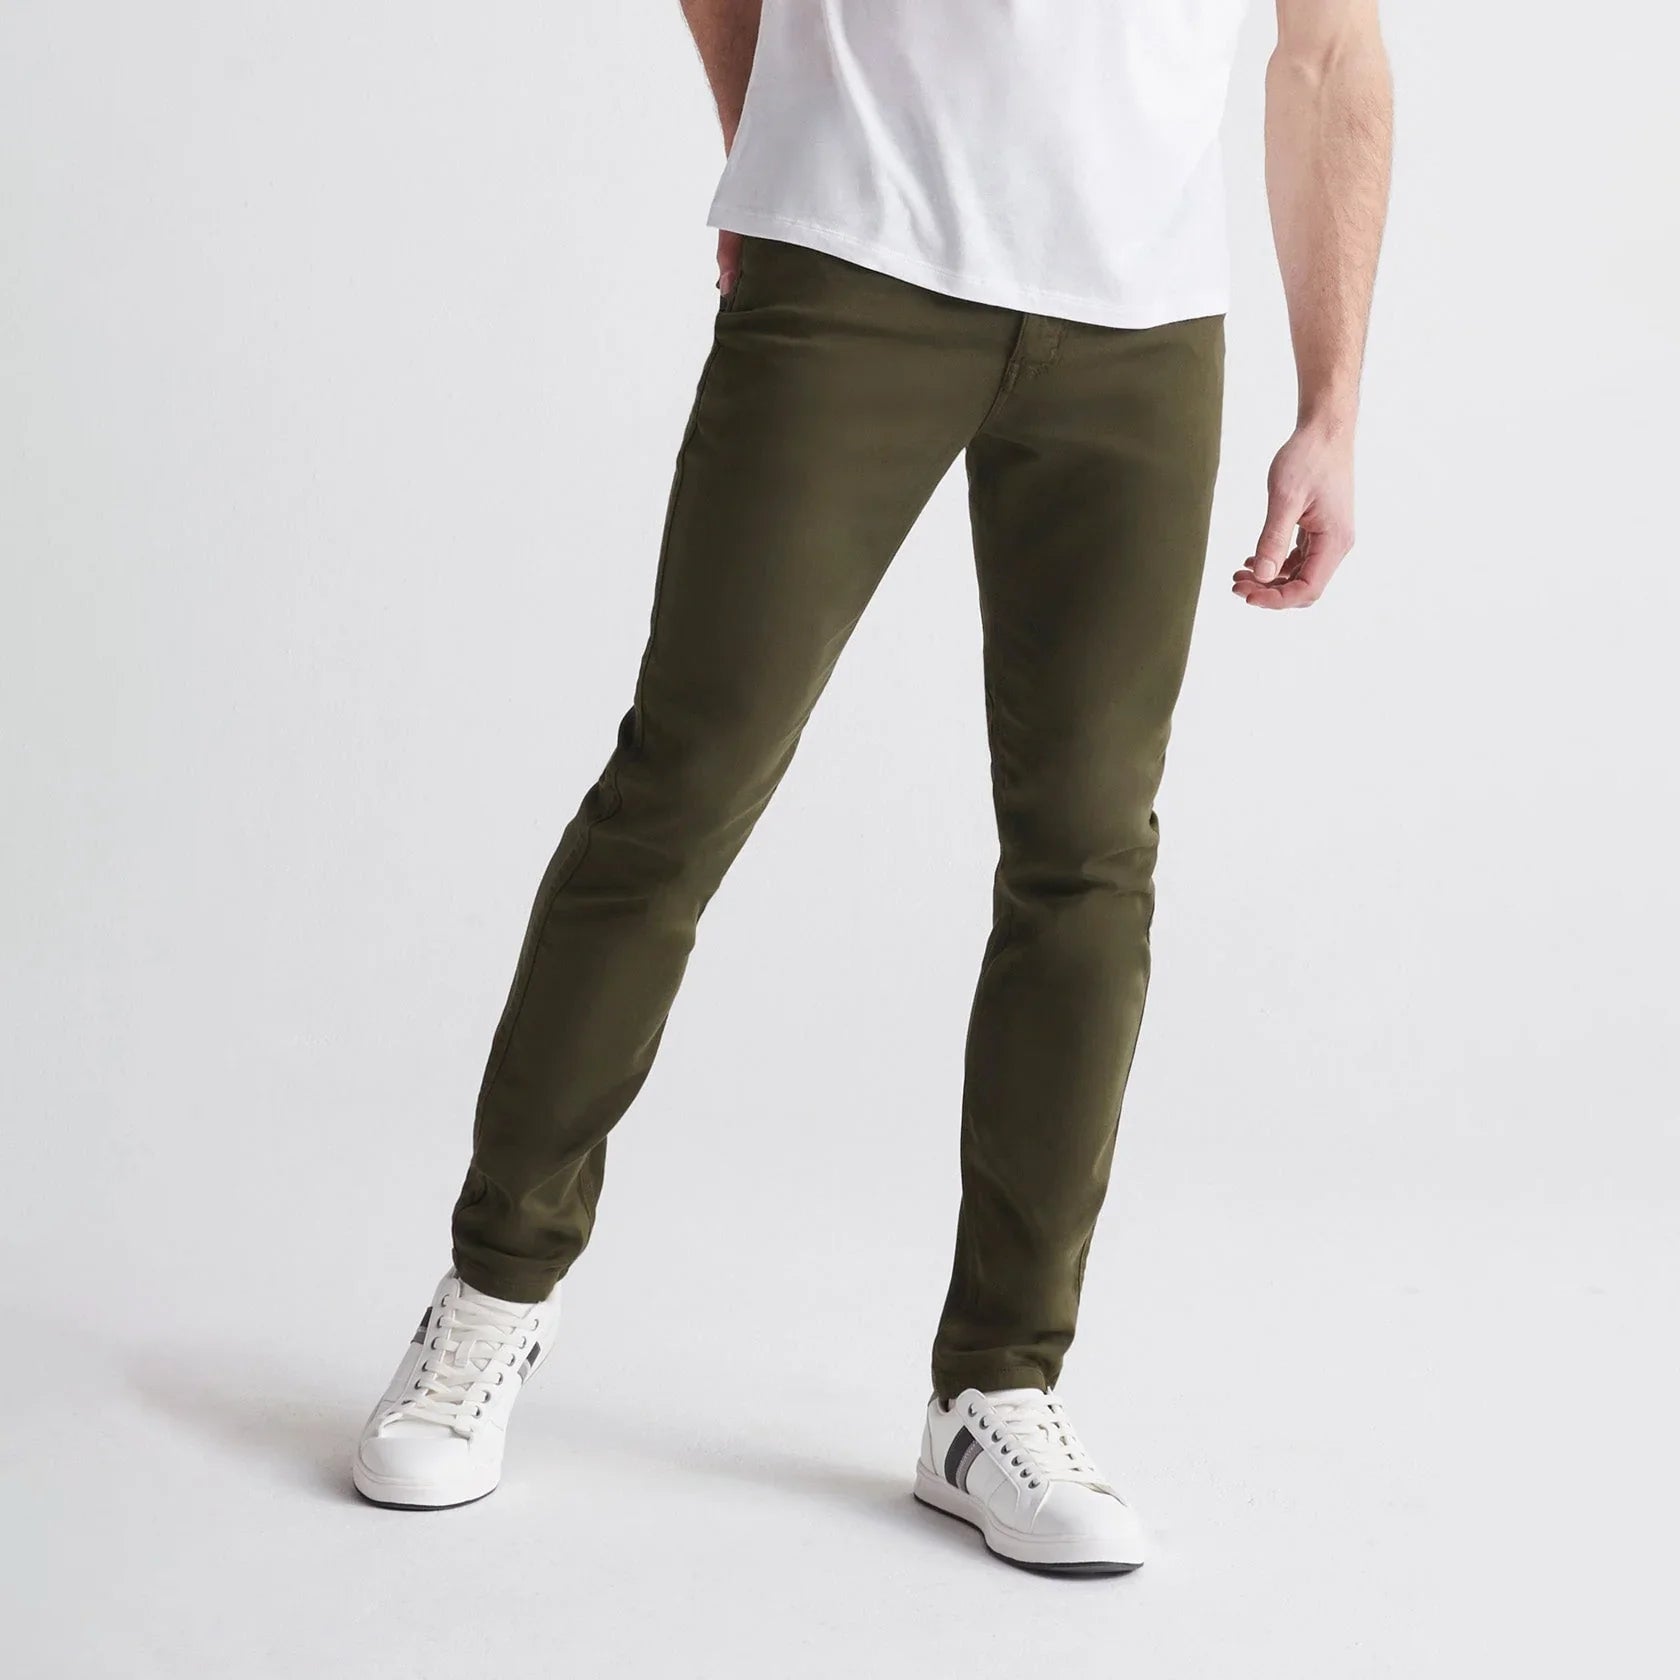 'Du/er No Sweat Pant Slim - Army' in 'Army' colour